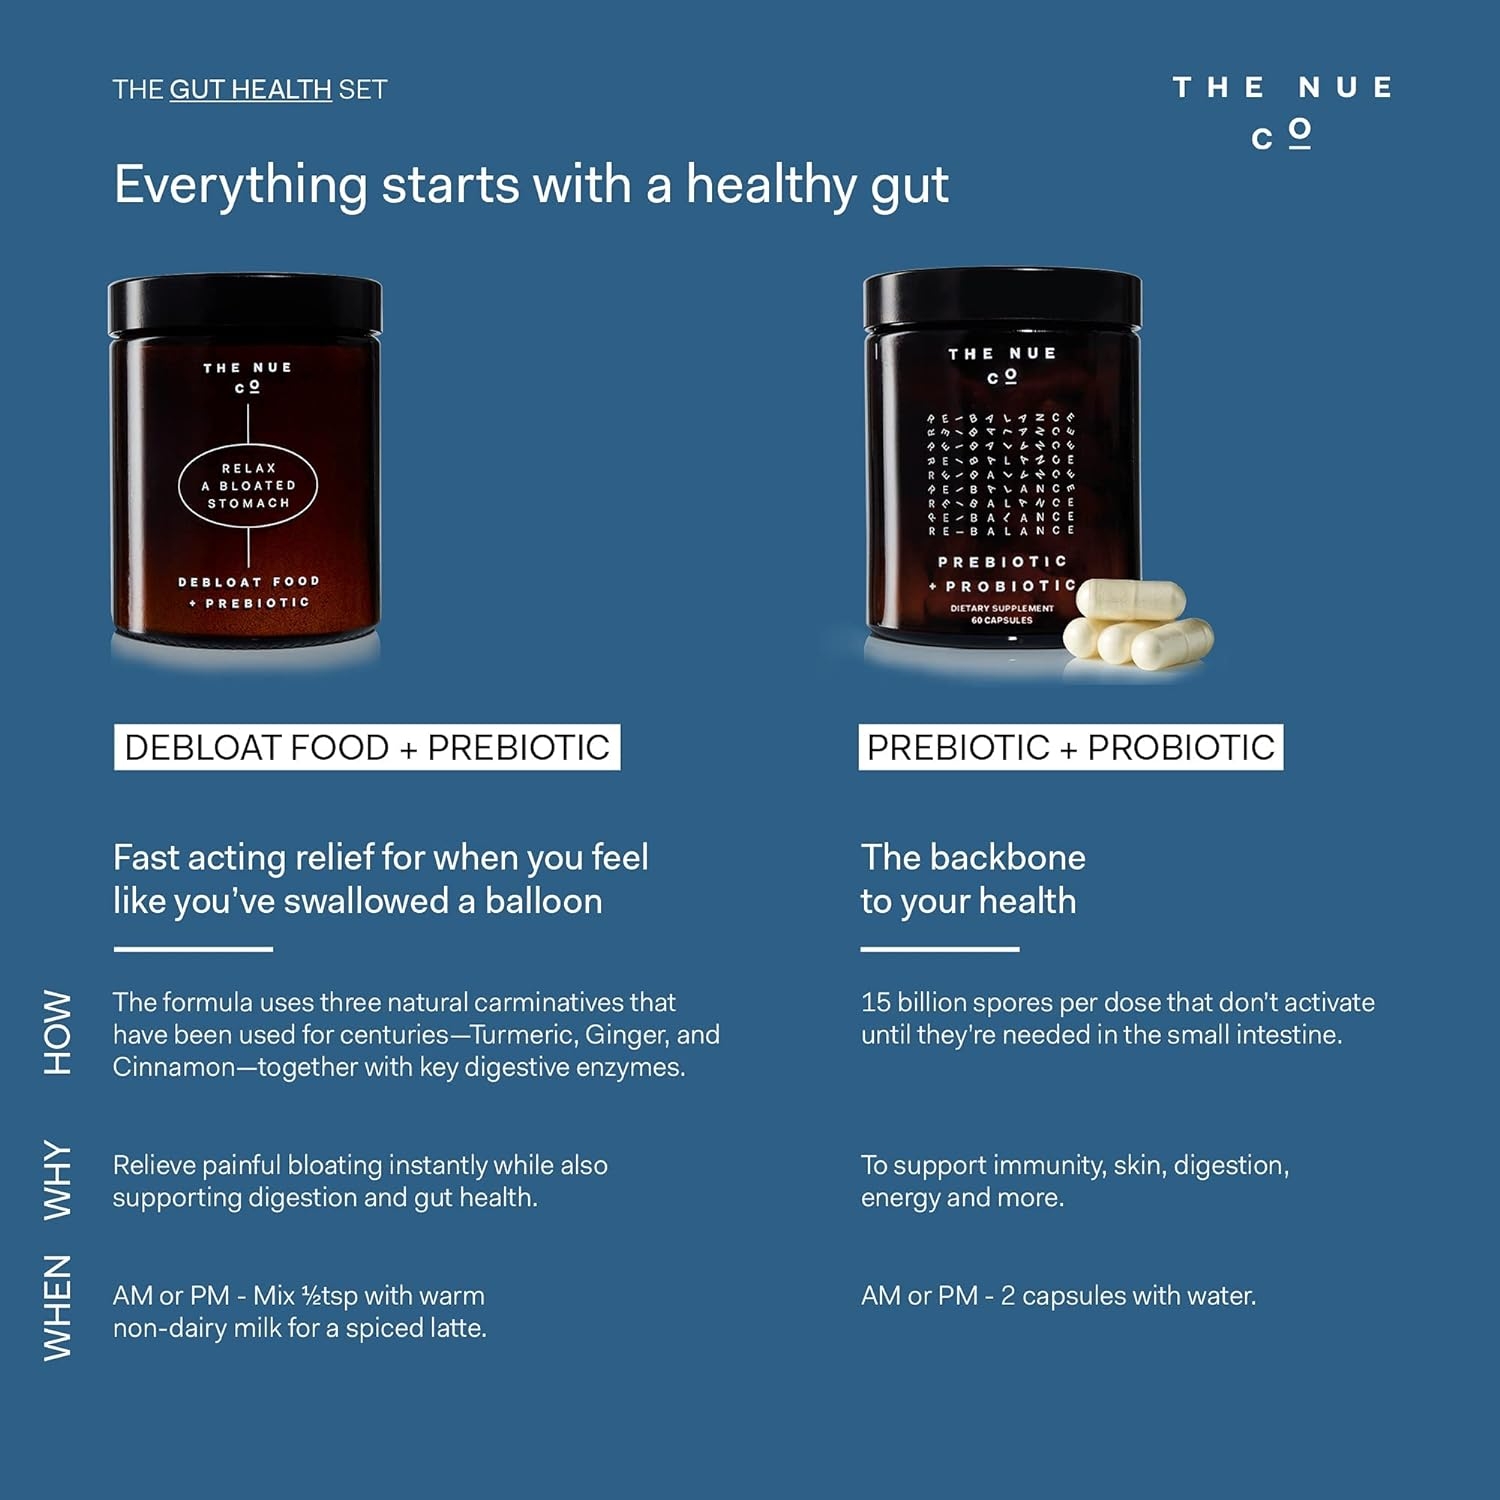 The Nue Co.- DEBLOAT+ - Daily Gut Health Supplement for IBS Symptoms and Bloating Relief - Vegan, Gluten-Free, Sugar-Free - 30 Day Supply